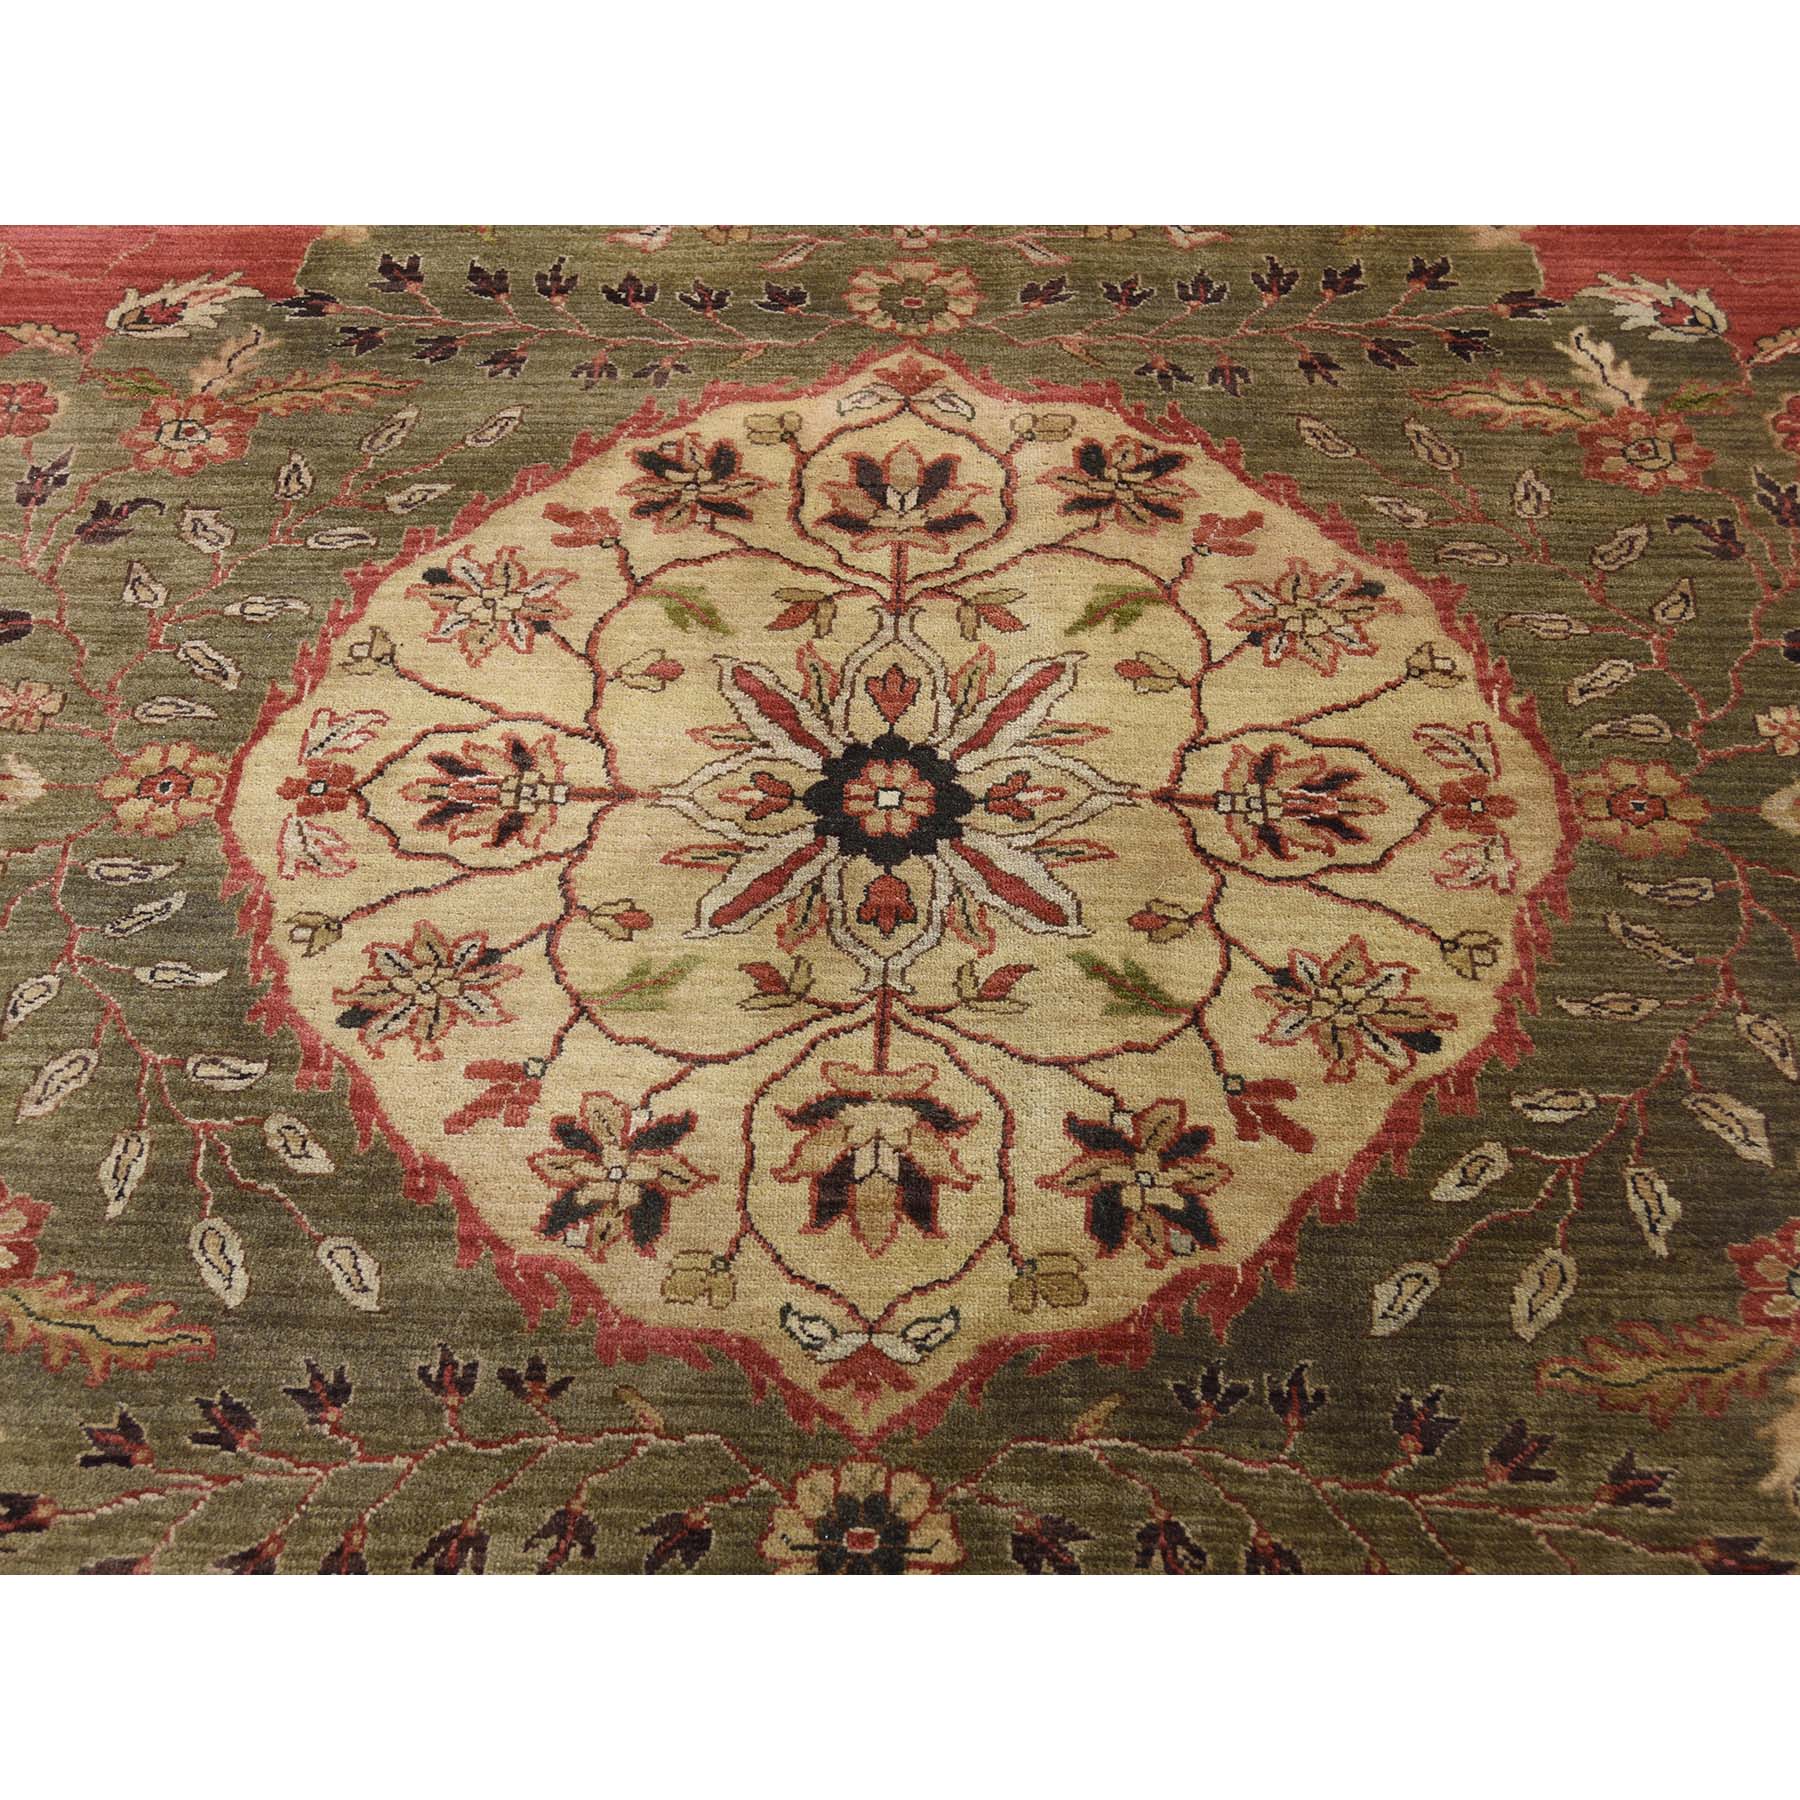 9-x12-2  Red,Antiqued Tabriz 300 KPSI Vegetable Dyes Hand-Knotted Oriental Rug 